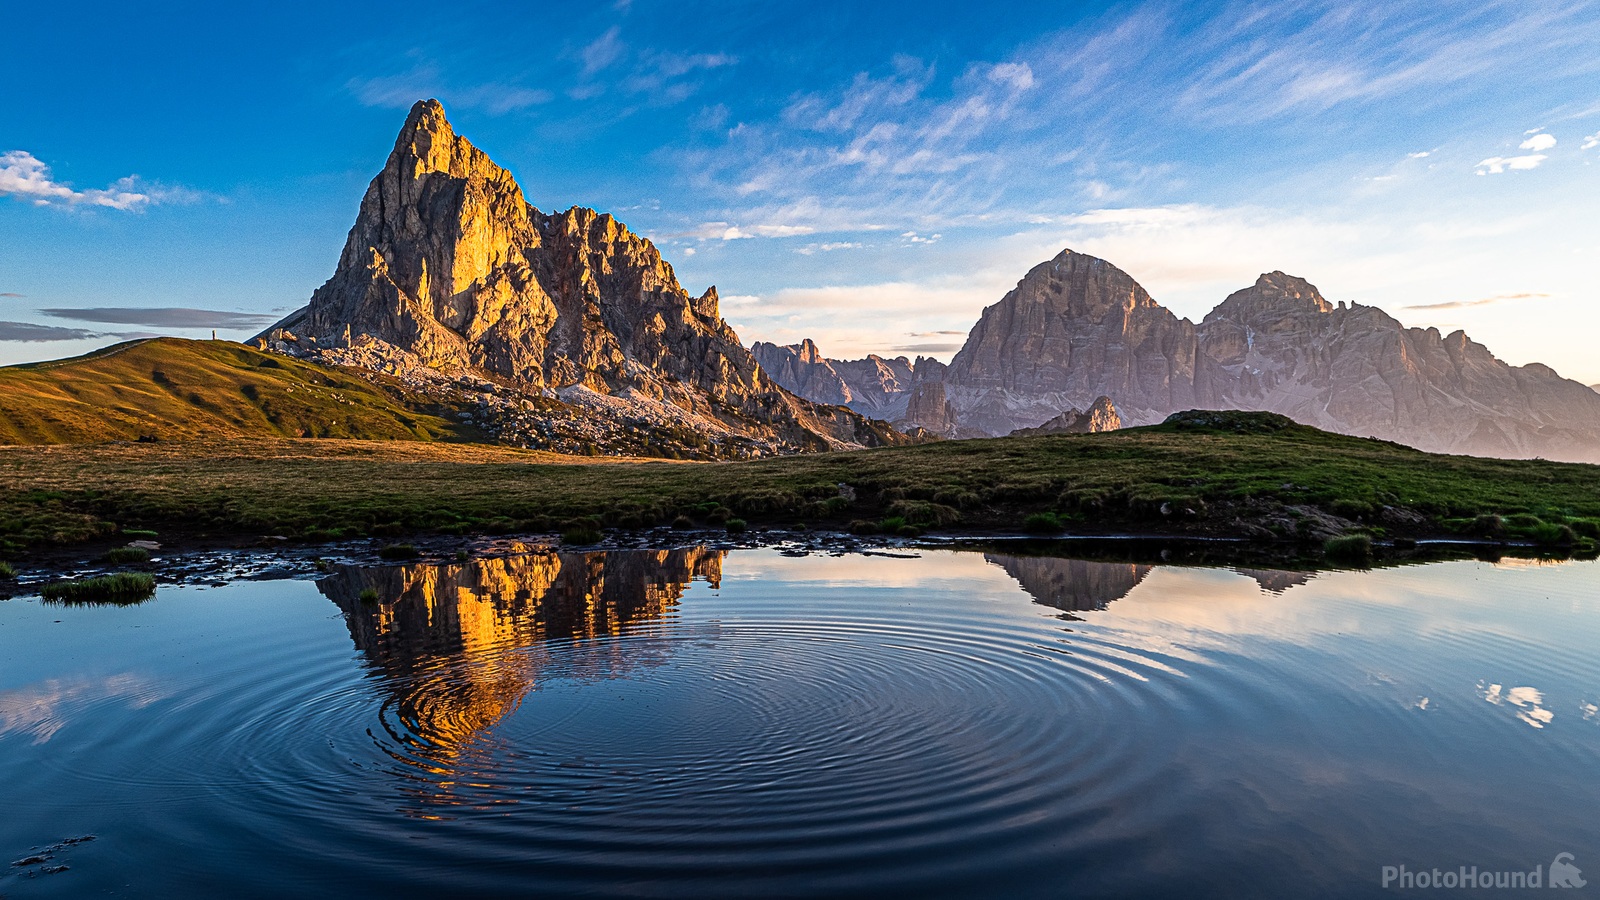 Image of Passo Giau - Pond Reflections by alberto Adami